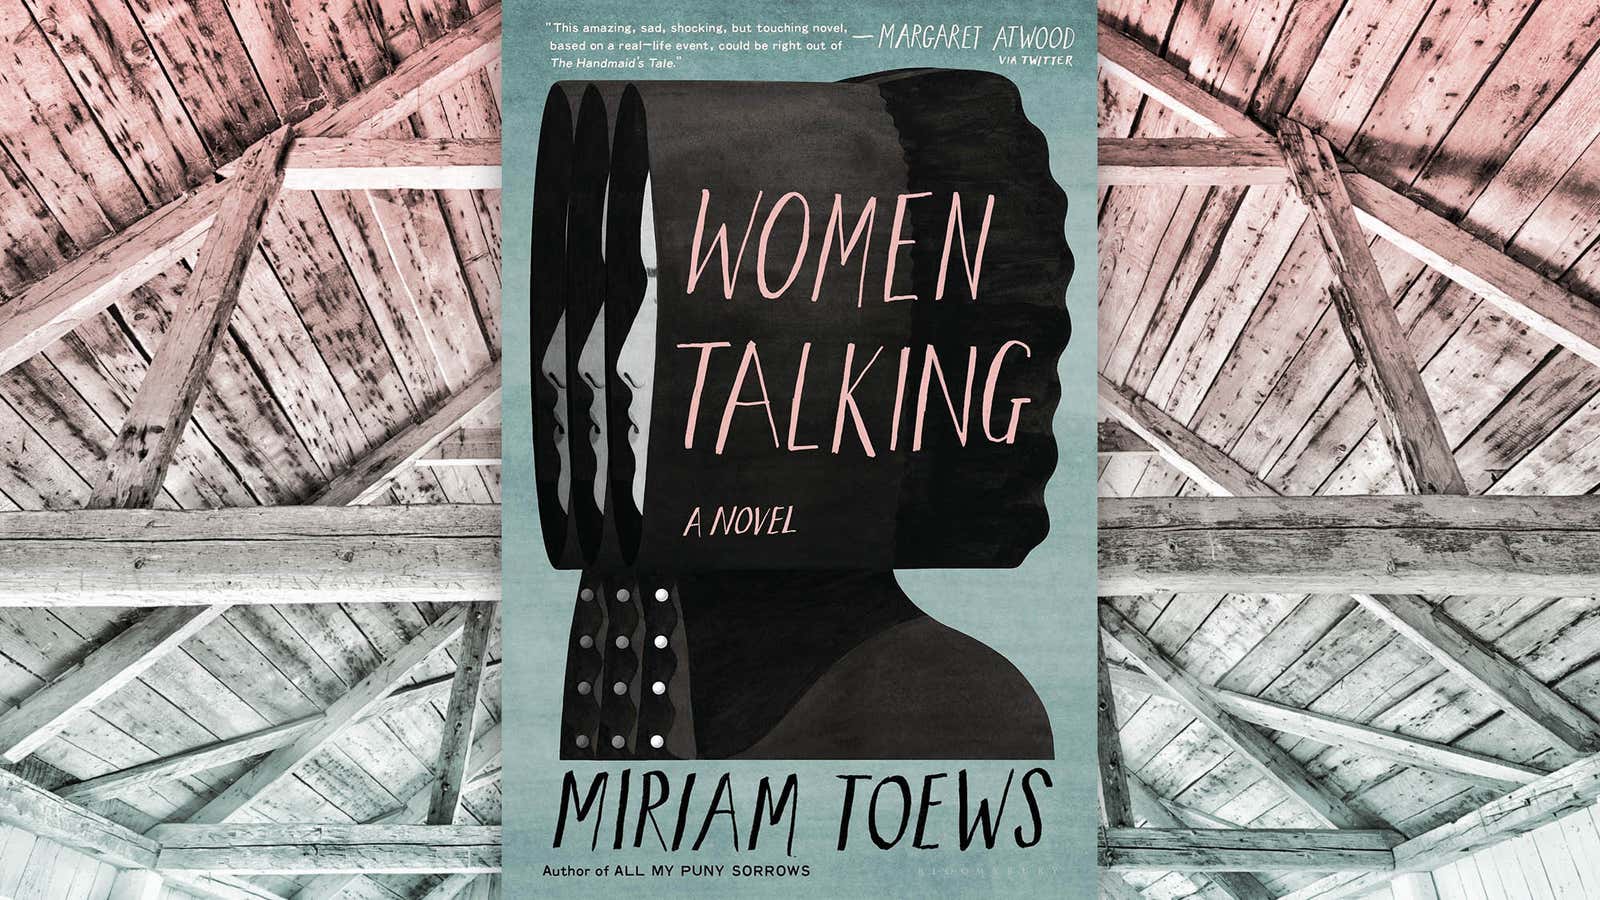 An awful crime gets <i>Women Talking</i> in one of the first great novels of the year